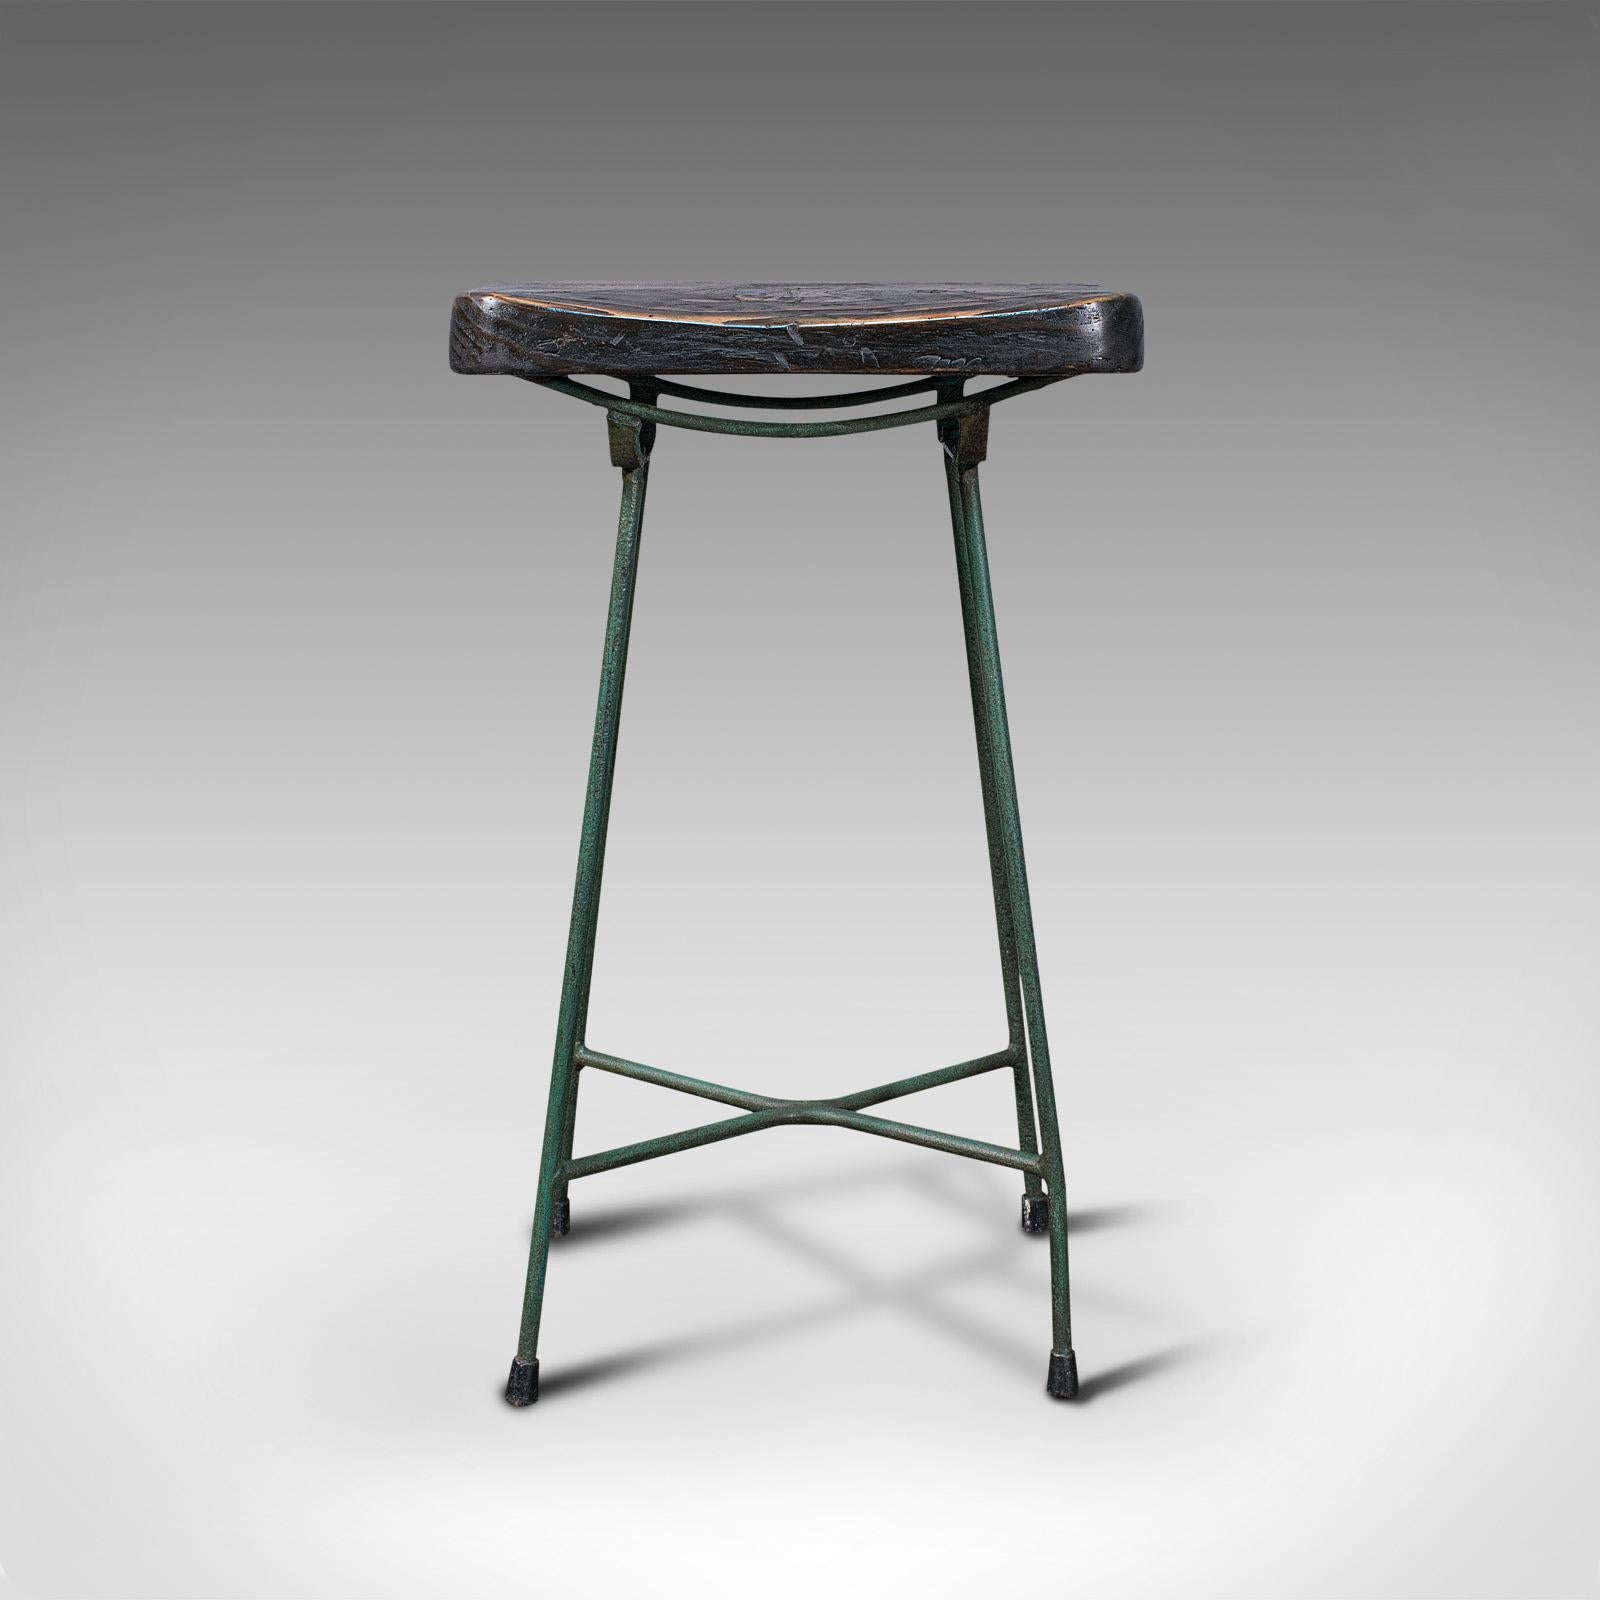 This is a vintage munitions factory stool. An English, pine and enamelled wrought iron legs in the industrial or laboratory taste, dating to the mid 20th century, circa 1940.

Pleasingly timeworn stool with charming appearance
Displays a